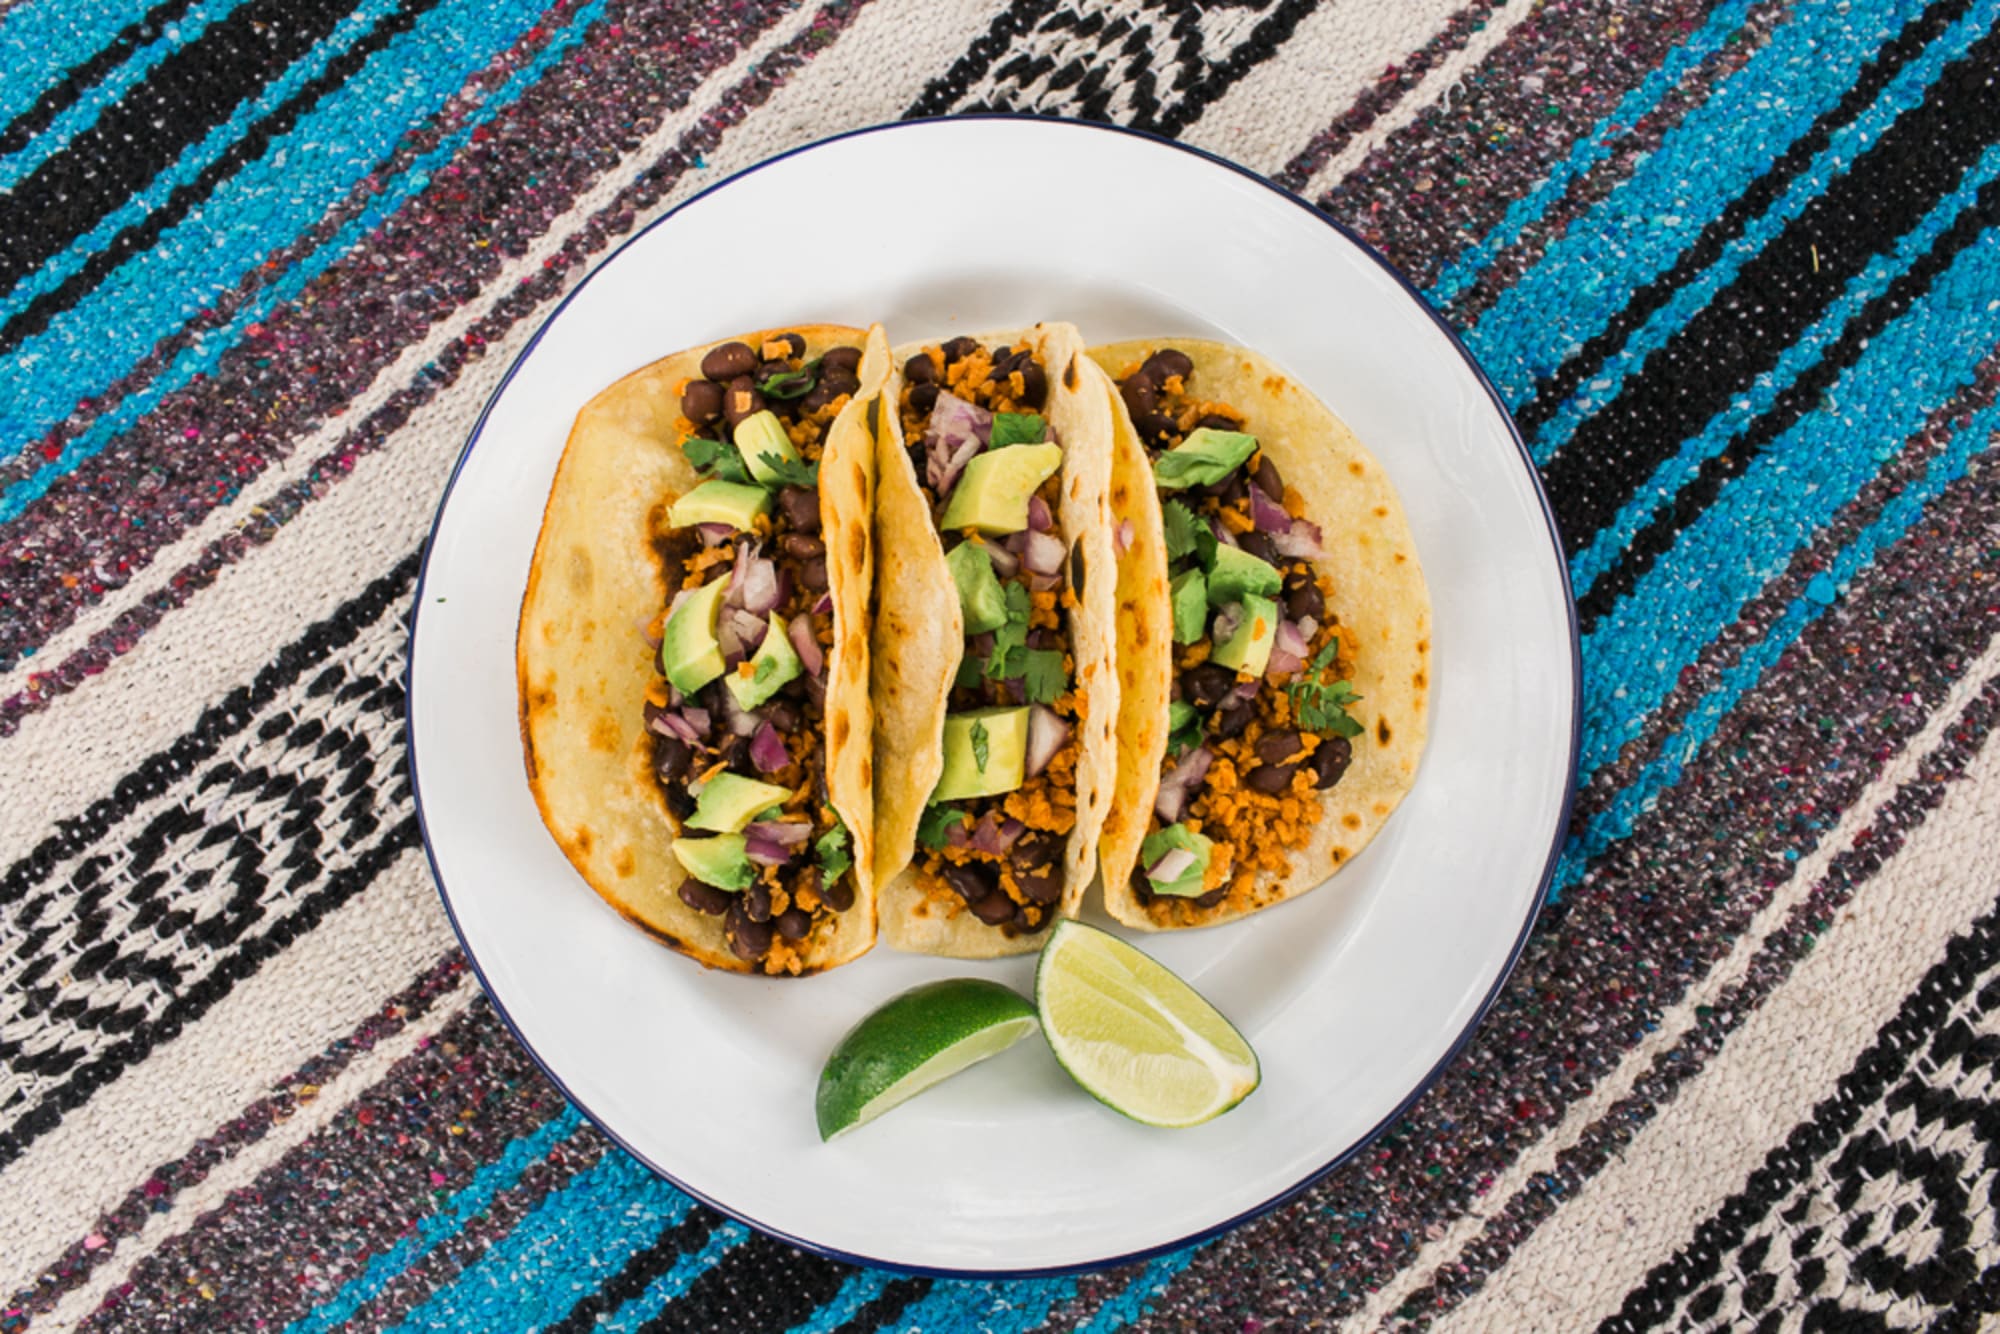 Camp Chef: 5 Ingredient Vegan Tacos by Fresh Off The Grid